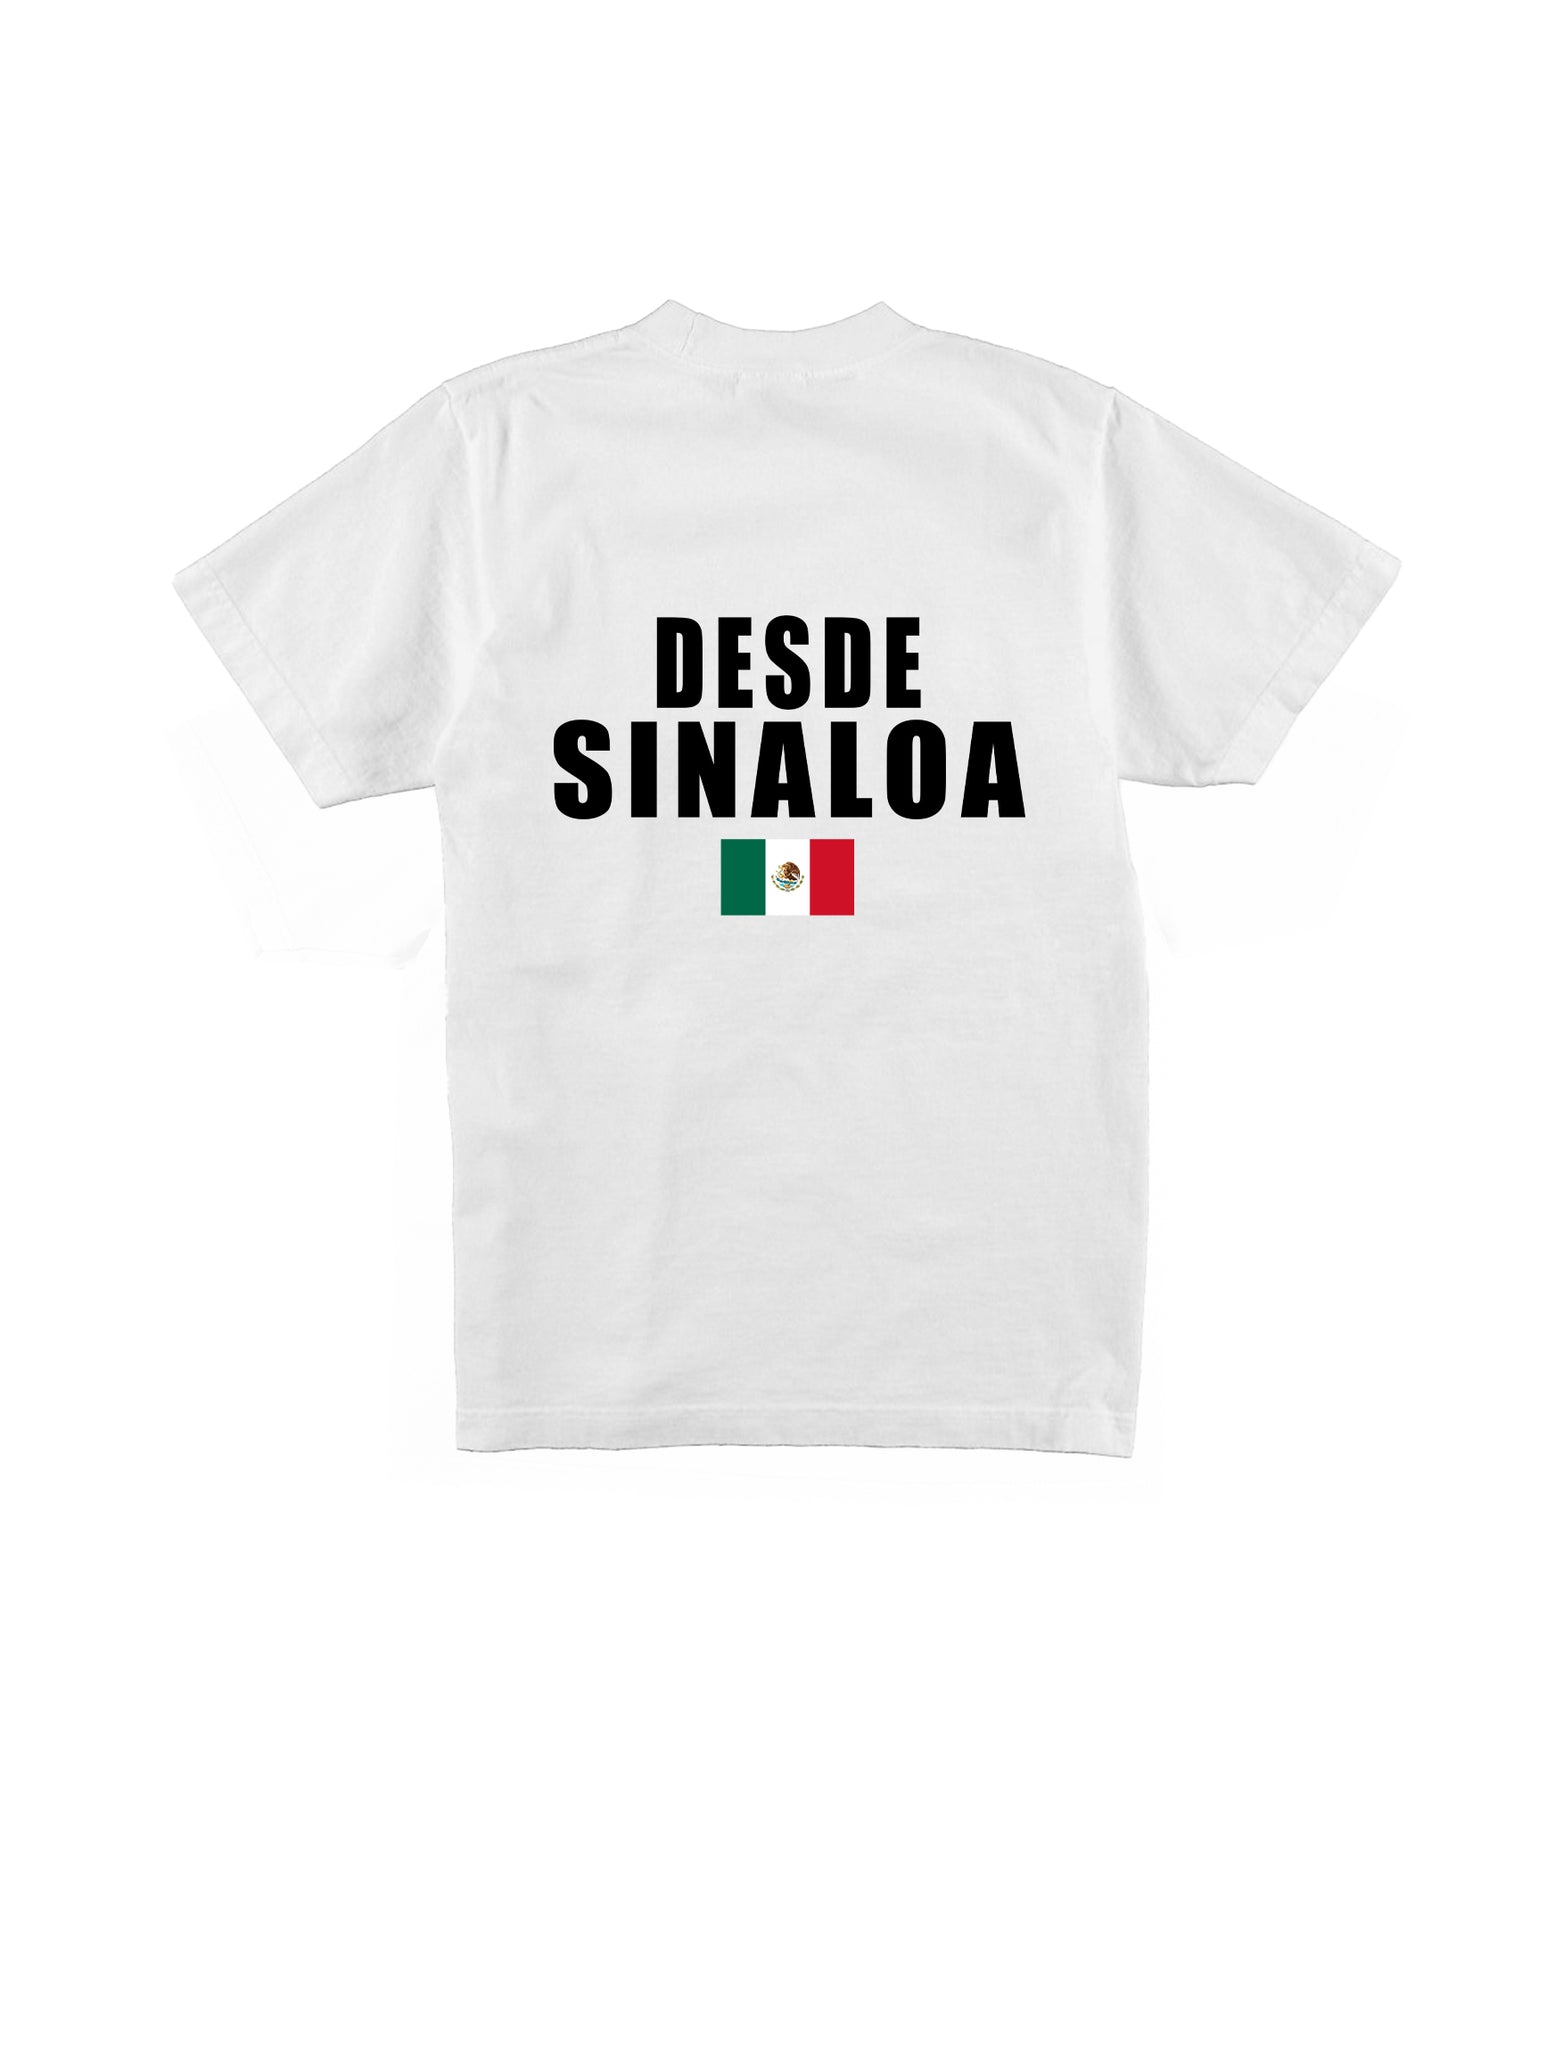 DESDE: STATE T-SHIRT🇲🇽 (STREETWEAR FIT)